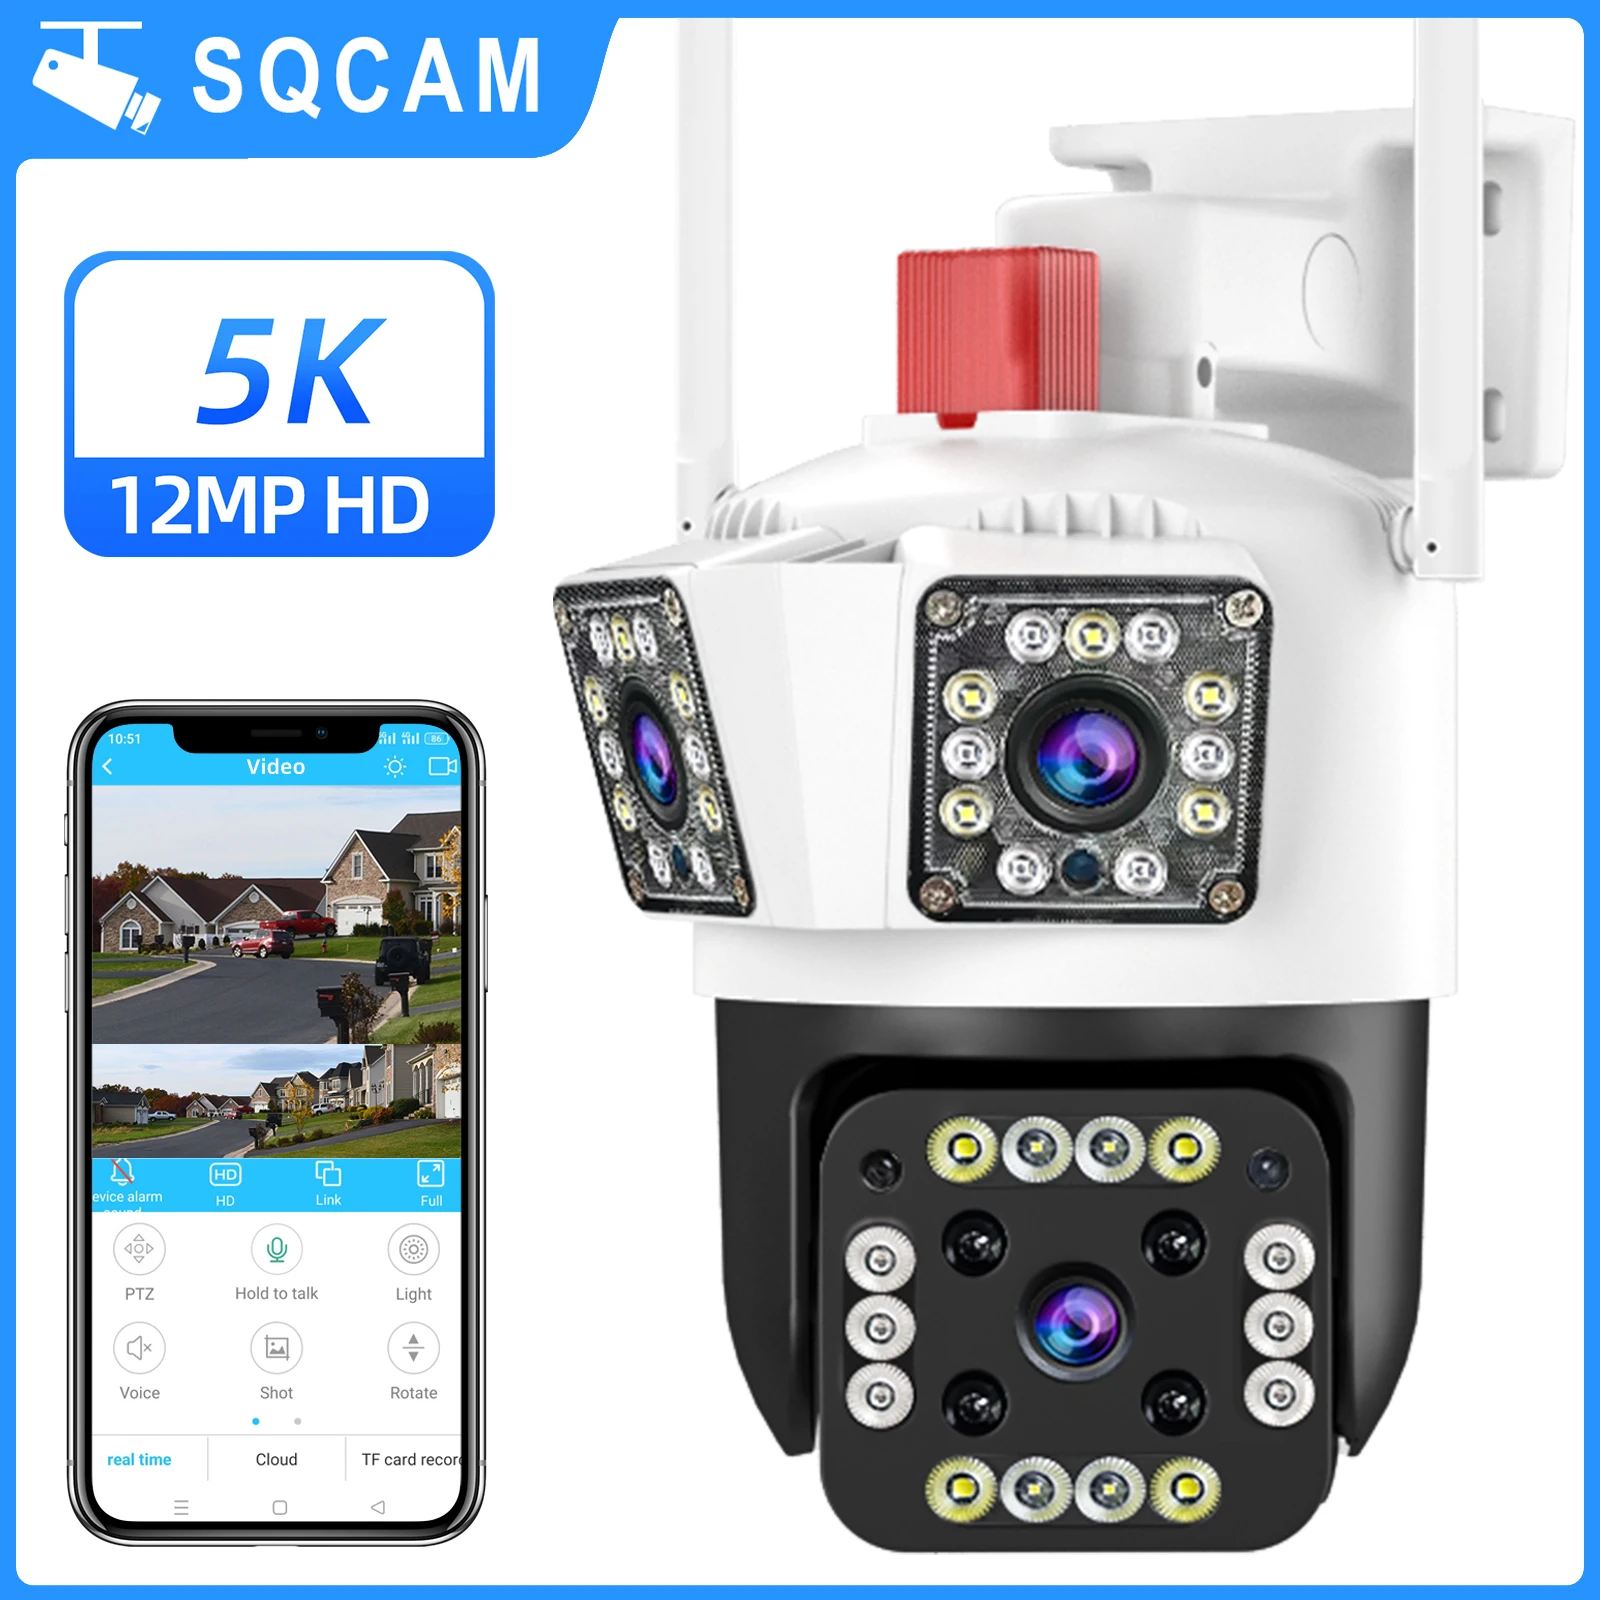 SQCAM Wifi IP Camera Surveillance 3 Lens Cameras Waterproof Security System Video 12MP HD For Outdoor Auto Tracking PTZ Cameras